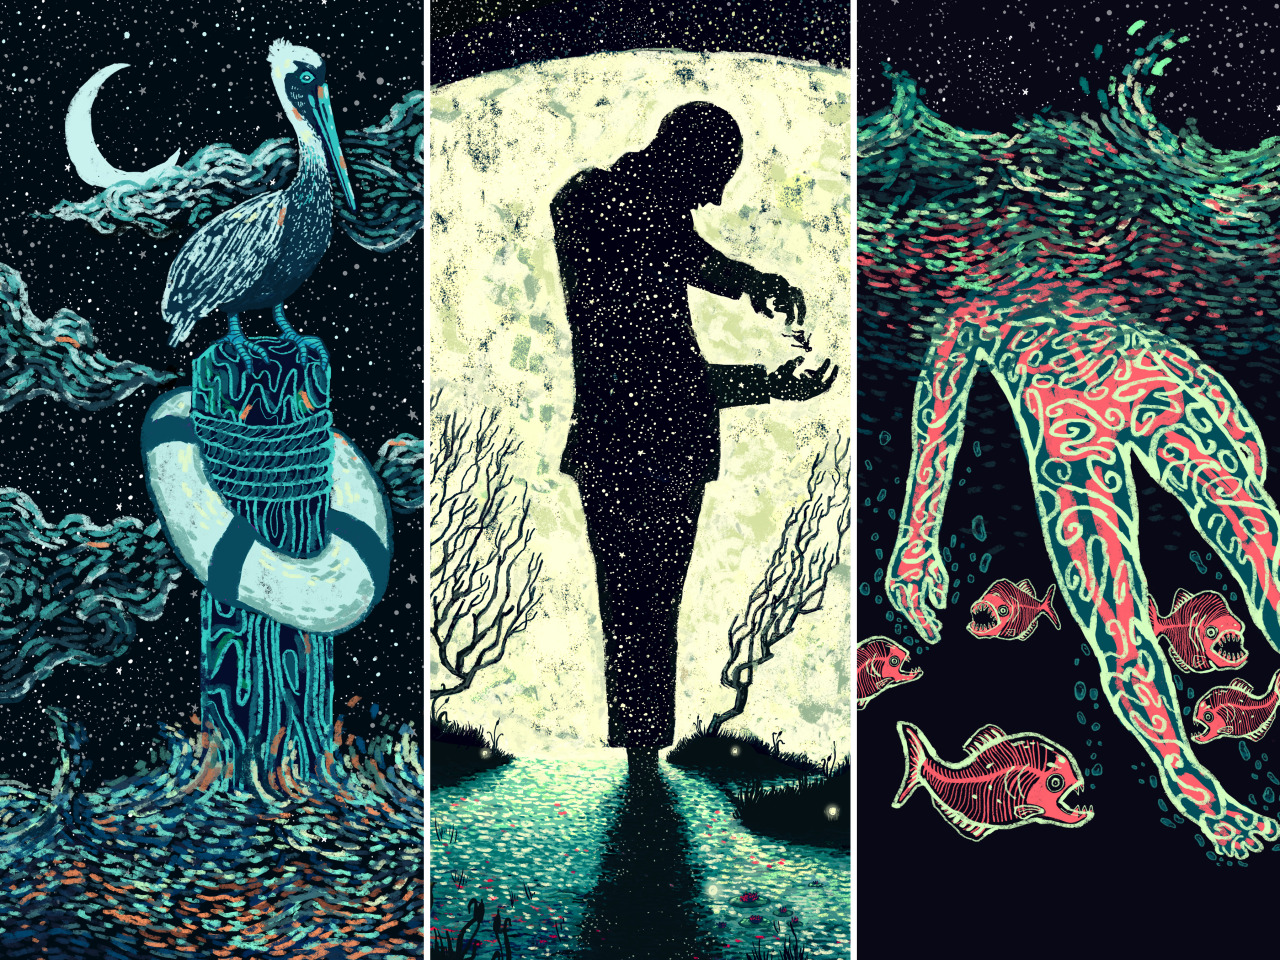 My name is James R Eads and I&#8217;m a Los Angeles based Illustrator currently working on an extremely large project. The Visions Project is the most ambitious project I have taken on. It is a collection of 23 high quality full color prints and a full 78 card tarot deck. I&#8217;ve been working on the Visions Project for the past year and I am ecstatic to finally be able to share it publicly. I&#8217;ve just launched a Kickstarter for The Visions Project full of rewards for becoming a backer for the project. Lot&#8217;s more on the project details, including a video, here: http://kck.st/18lhLO2